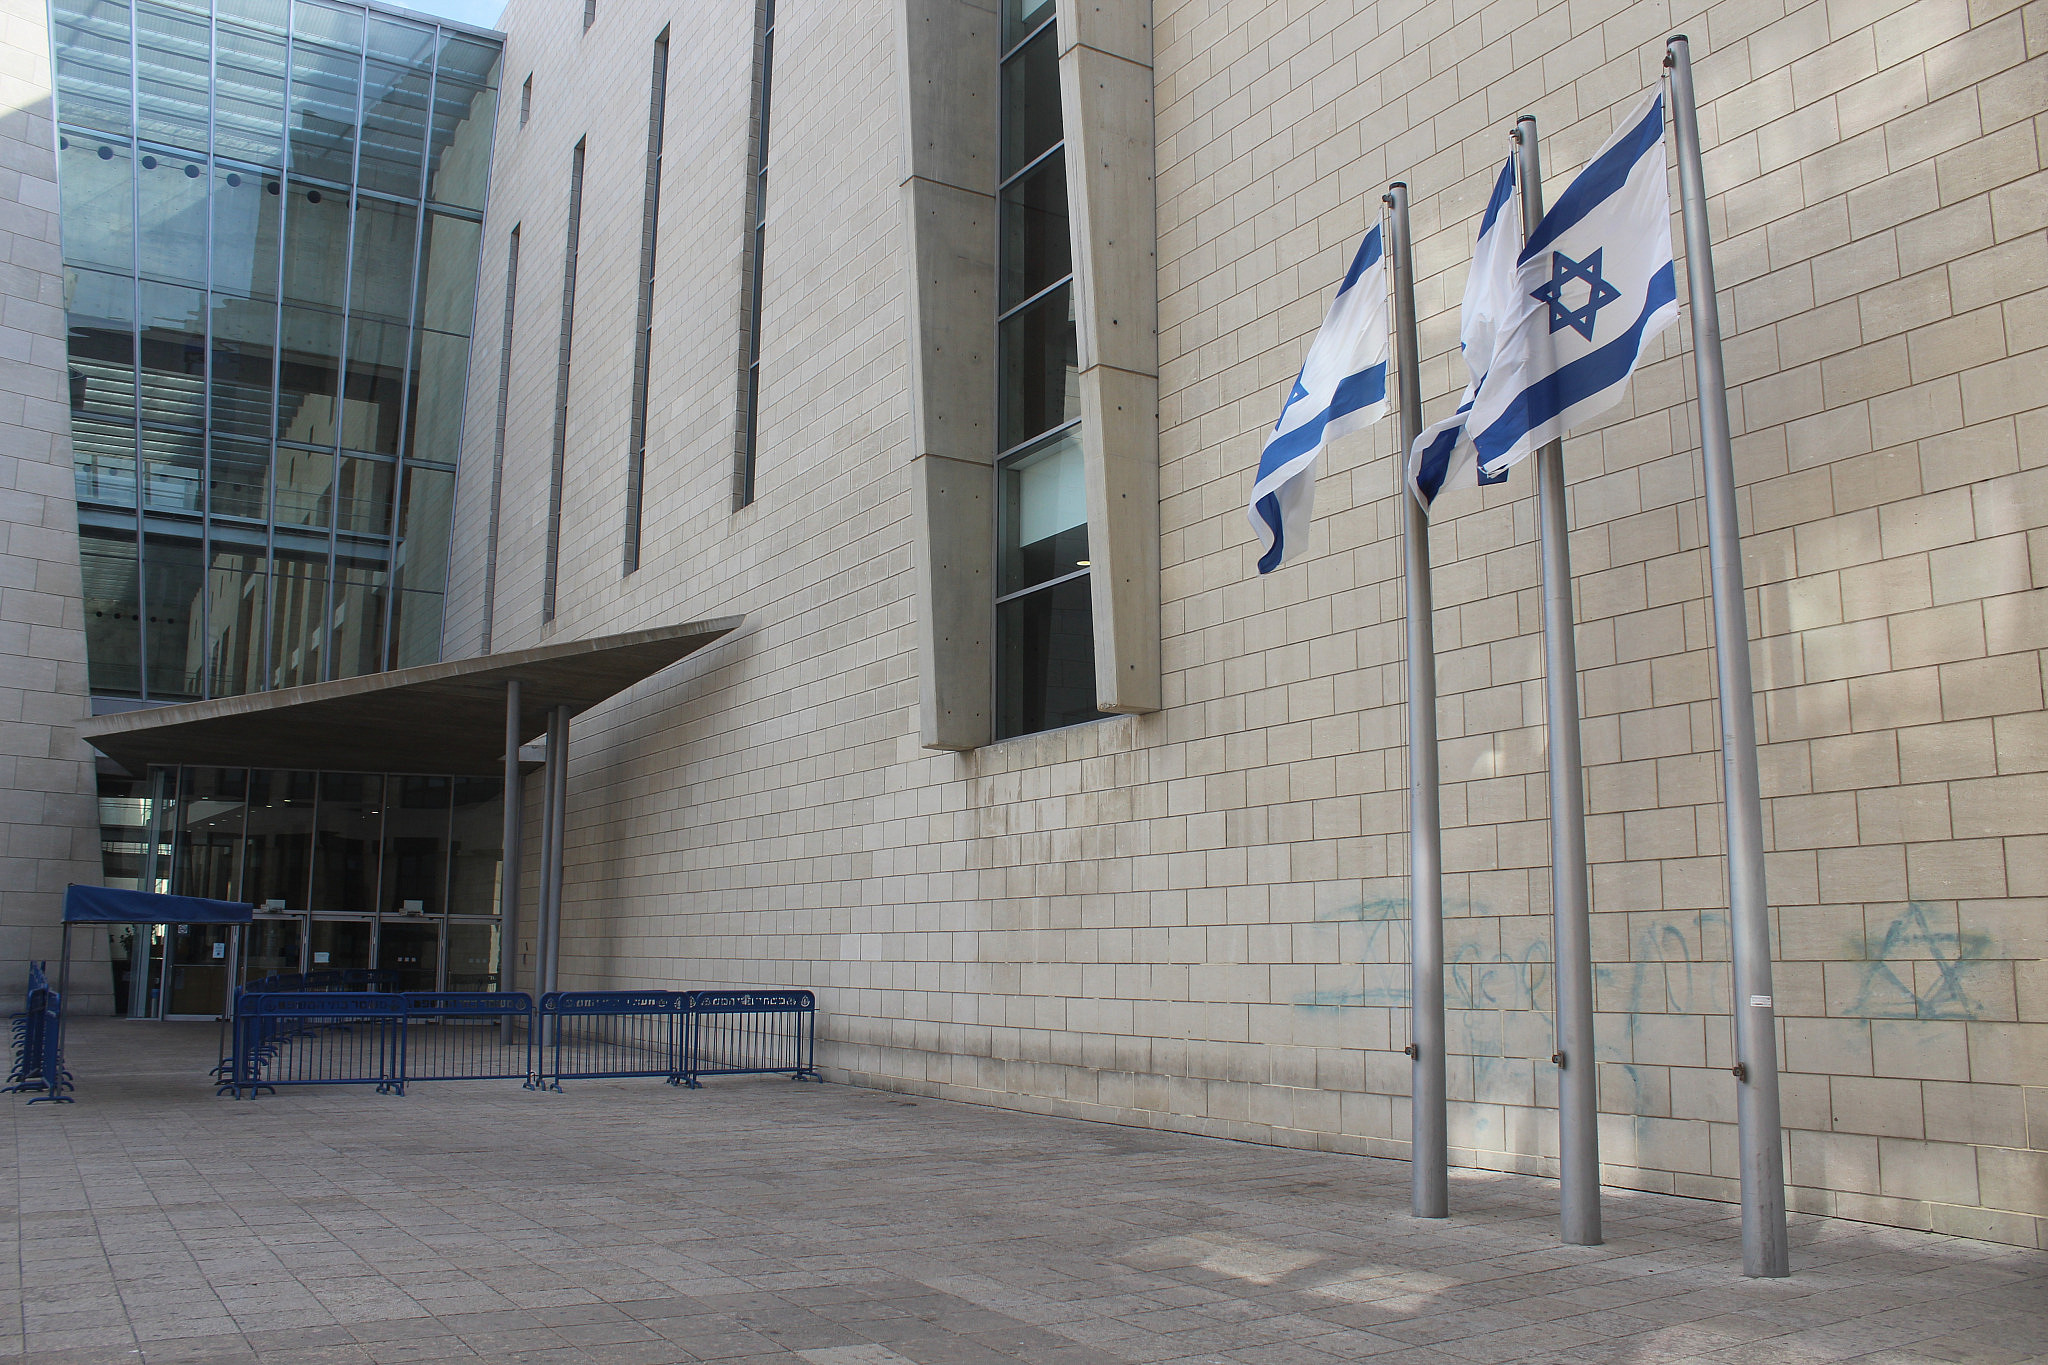 A Magen David and the slogan “Am Yisrael Chai” spray-painted on the wall of Haifa Magistrates Court on the day of Eghbaria’s hearing, September 12, 2021. (Jonathan Shamir)